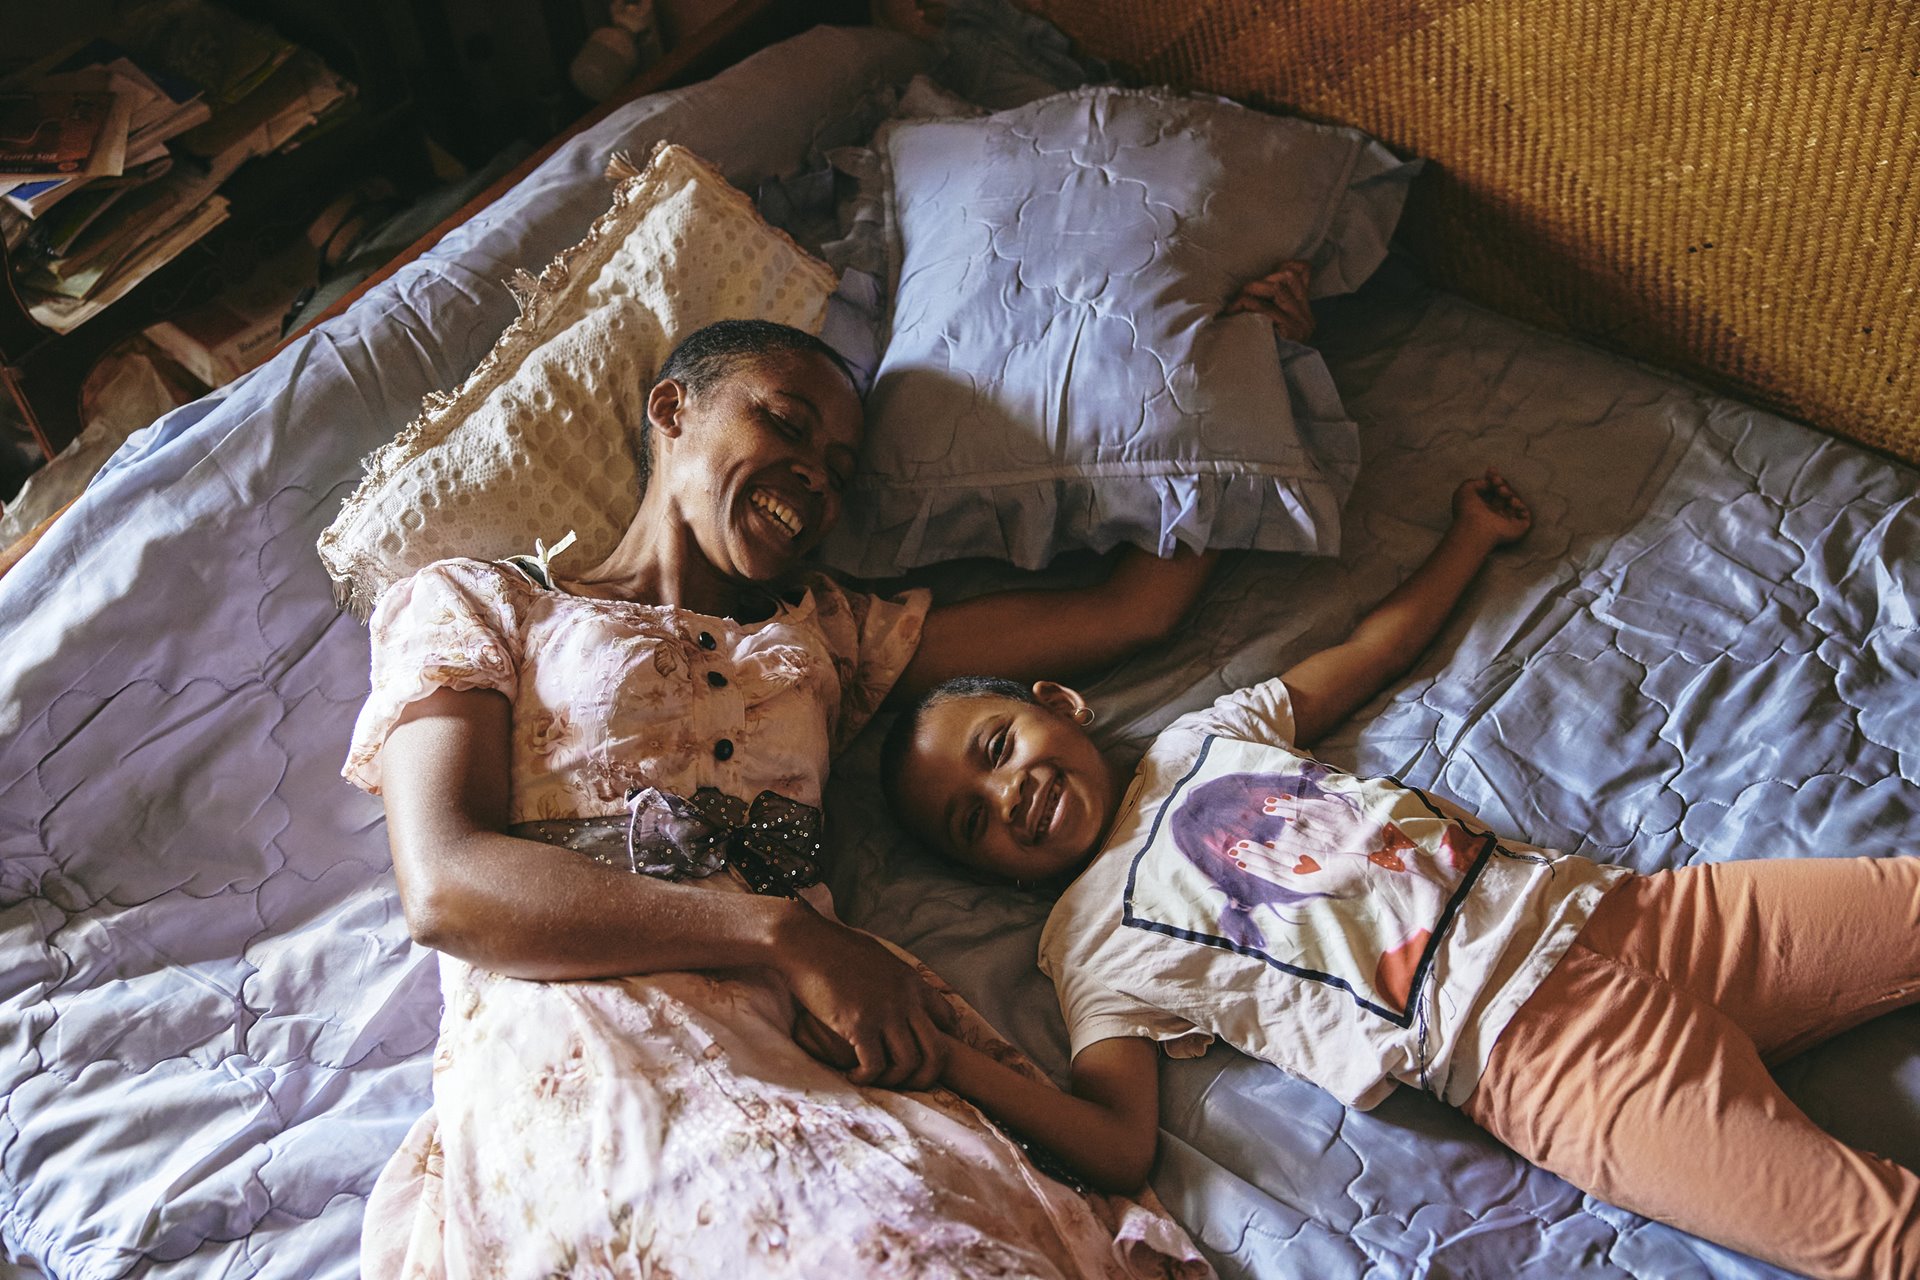 Fara and her daughter Odliatemix lie together on the bed they share with Dada Paul, Fara&rsquo;s father, in Antananarivo, Madagascar. Fara is the sole provider for the family of three and struggles to balance her time between work, caring for her father, and spending time with her daughter.